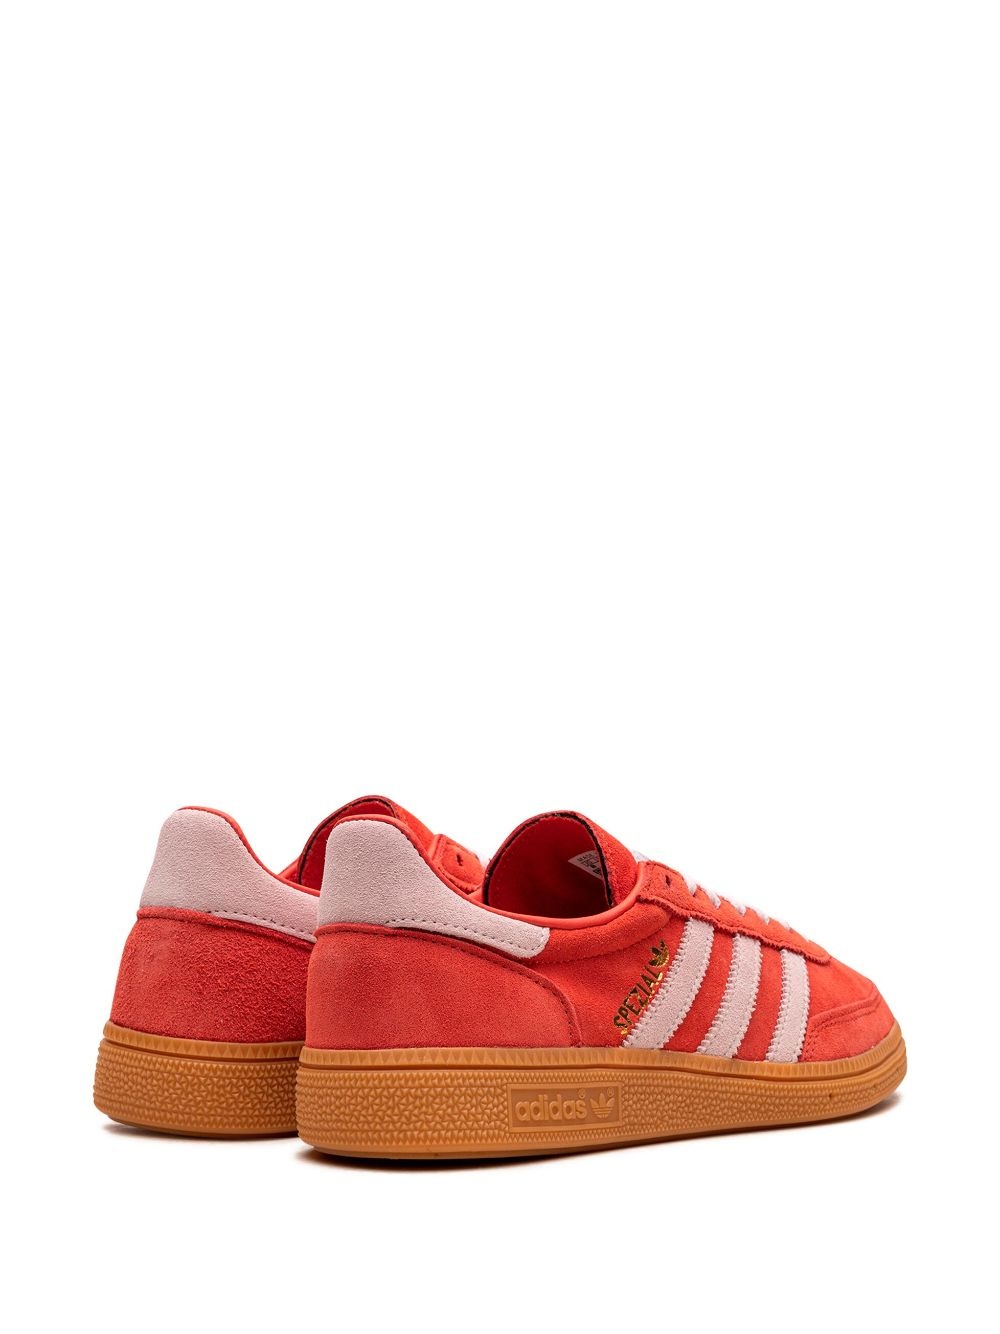 Handball Spezial "Bright Red Clear Pink" sneakers - 3